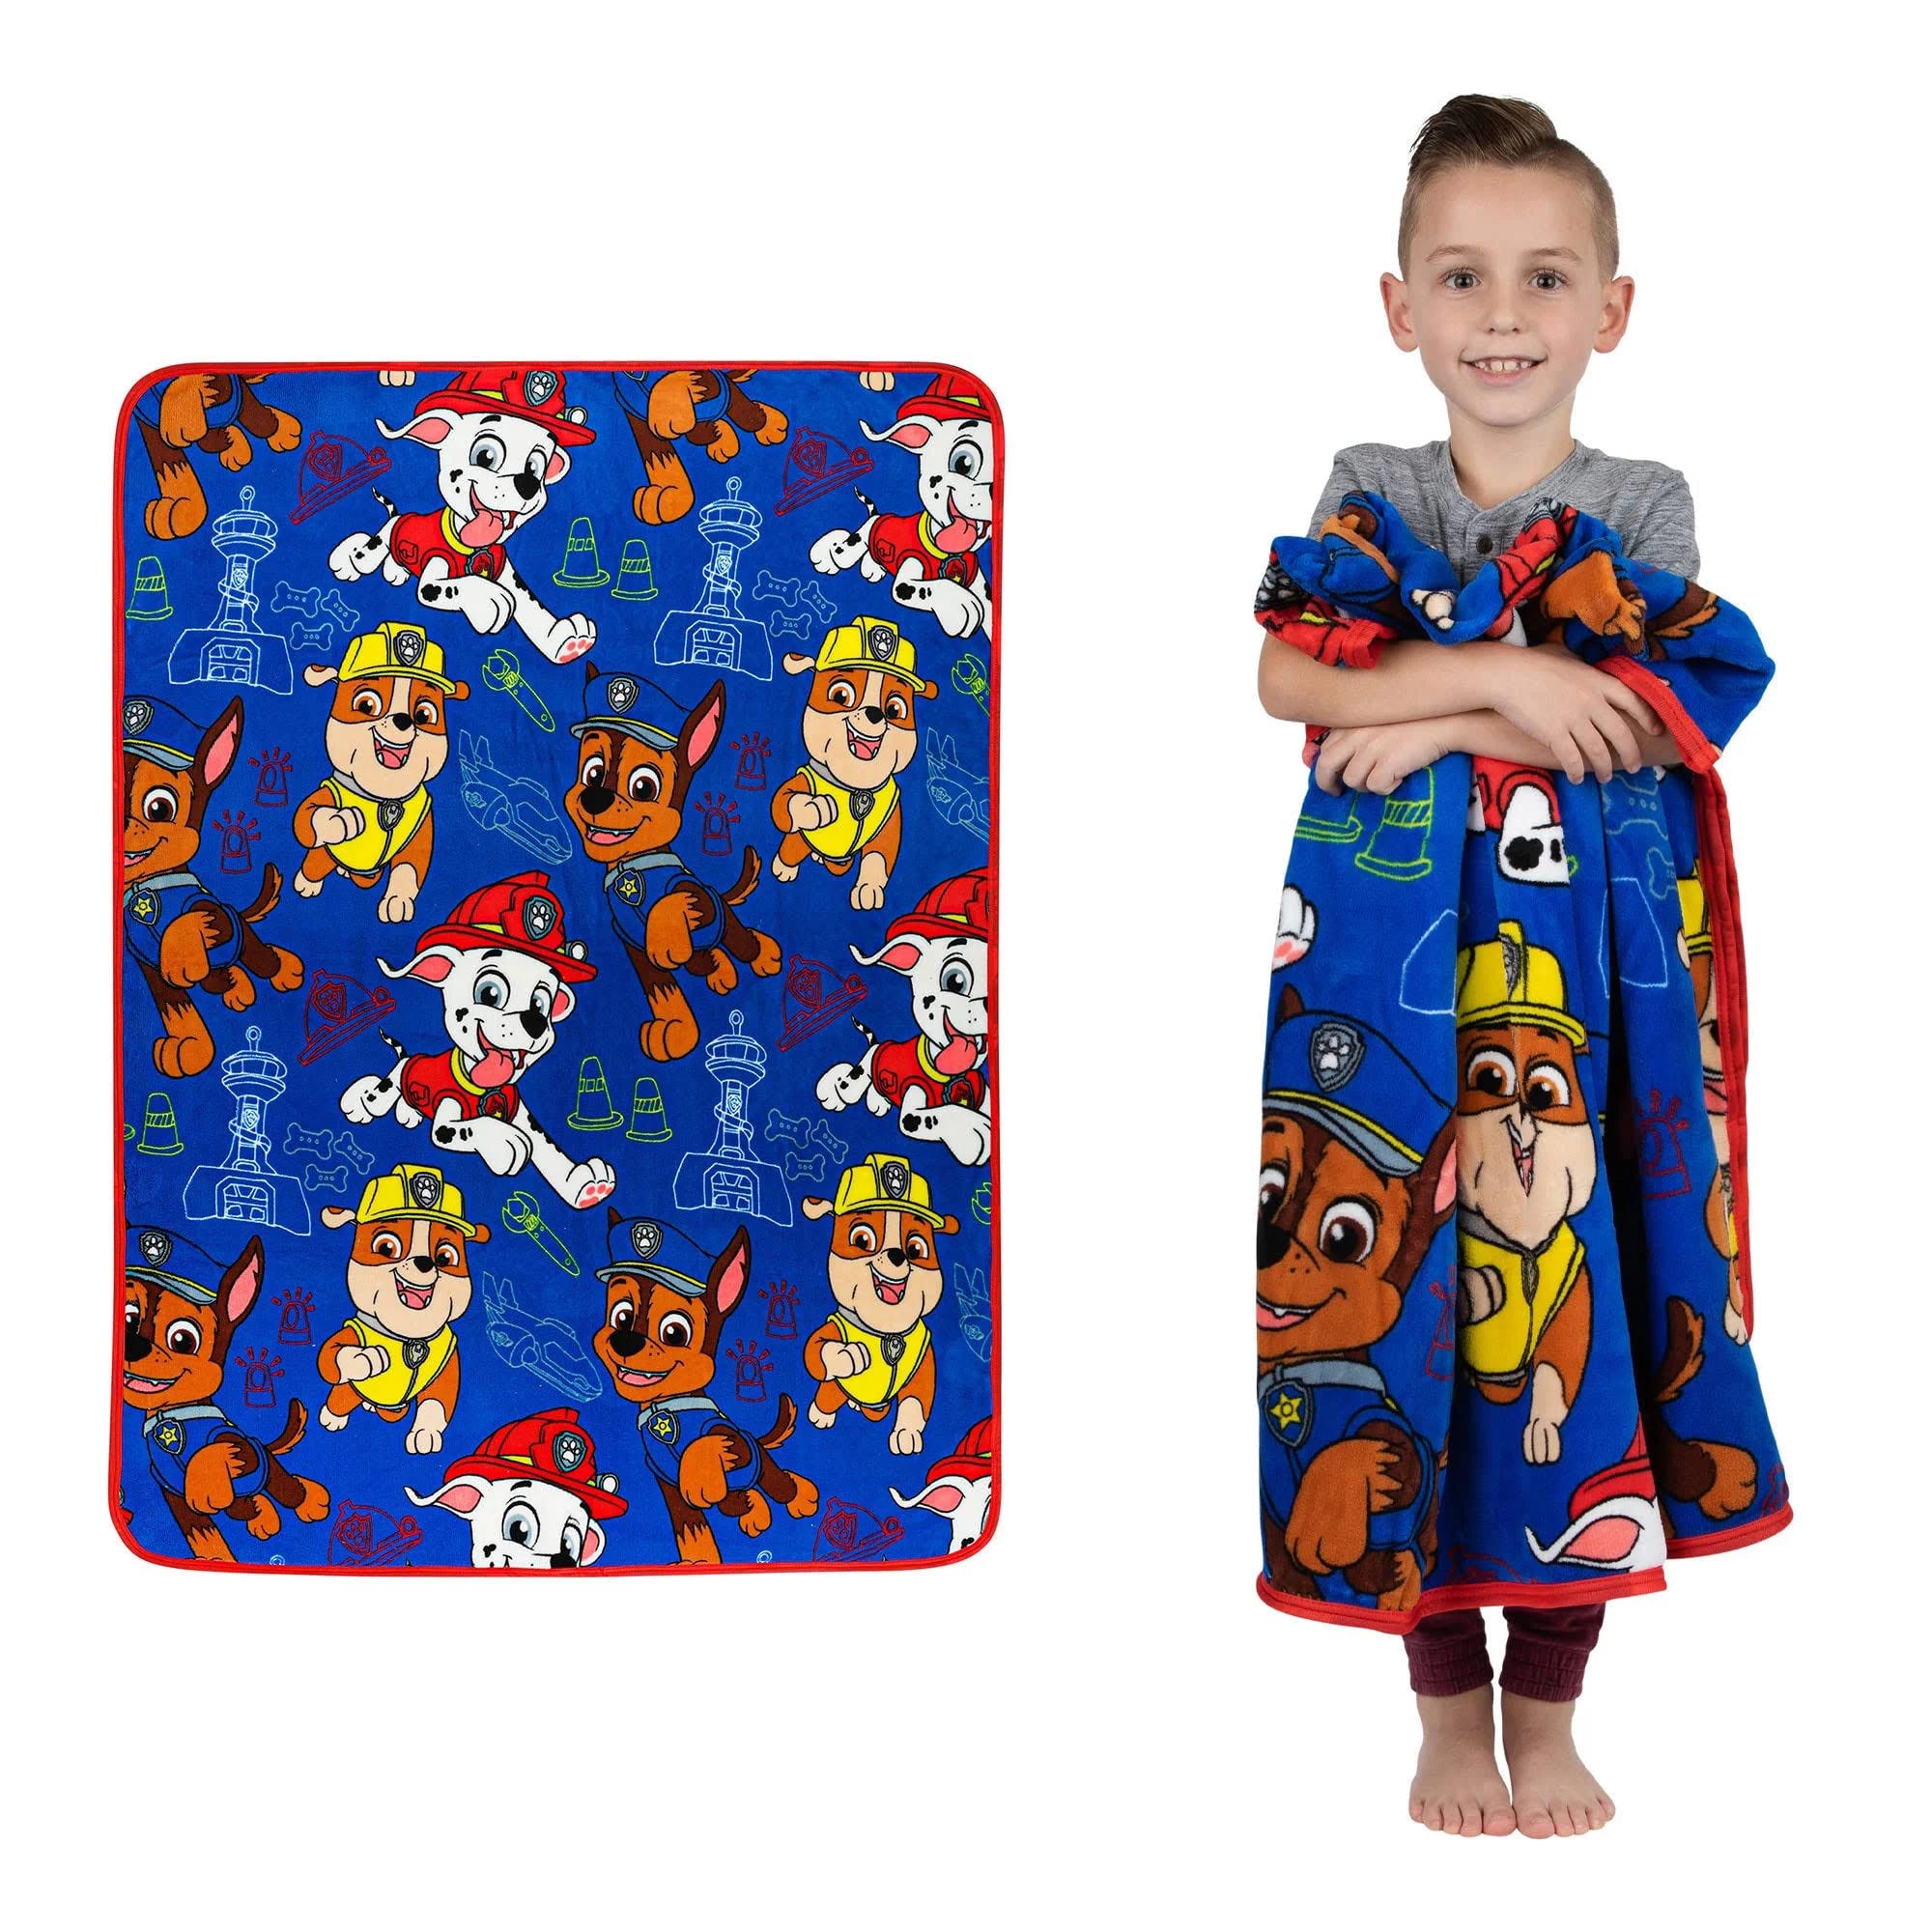 Paw Patrol Super Soft Plush Throw Blanket for Kids by Franco | Image